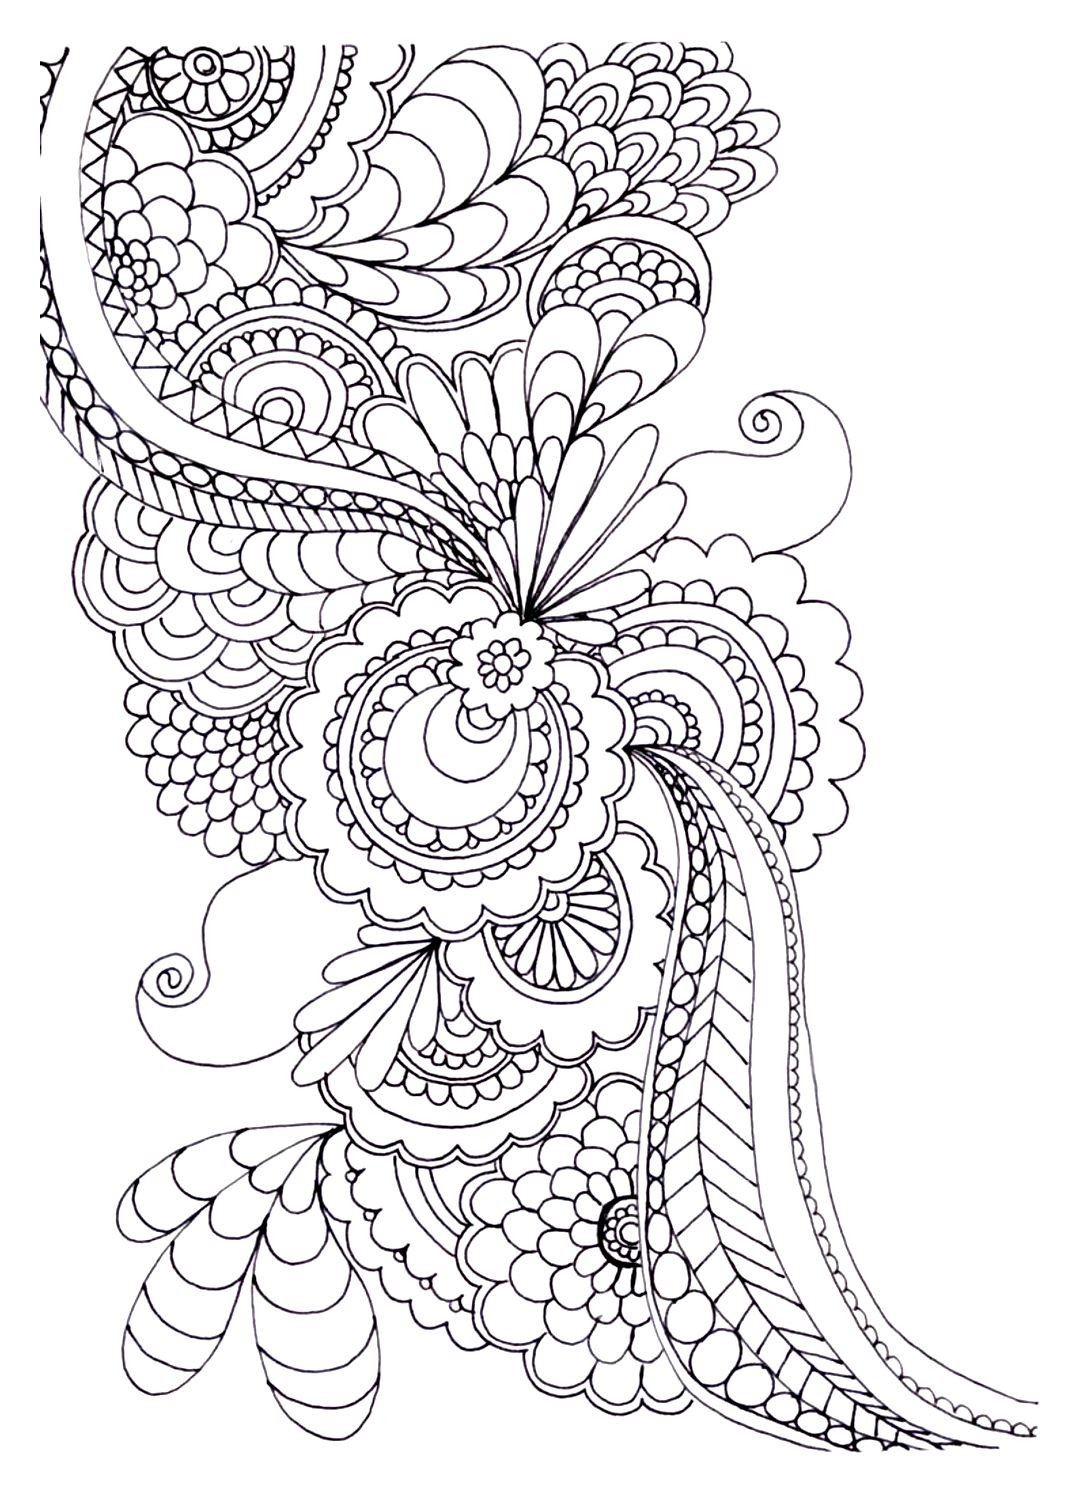 Coloring Pages Adult
 20 Free Adult Colouring Pages The Organised Housewife